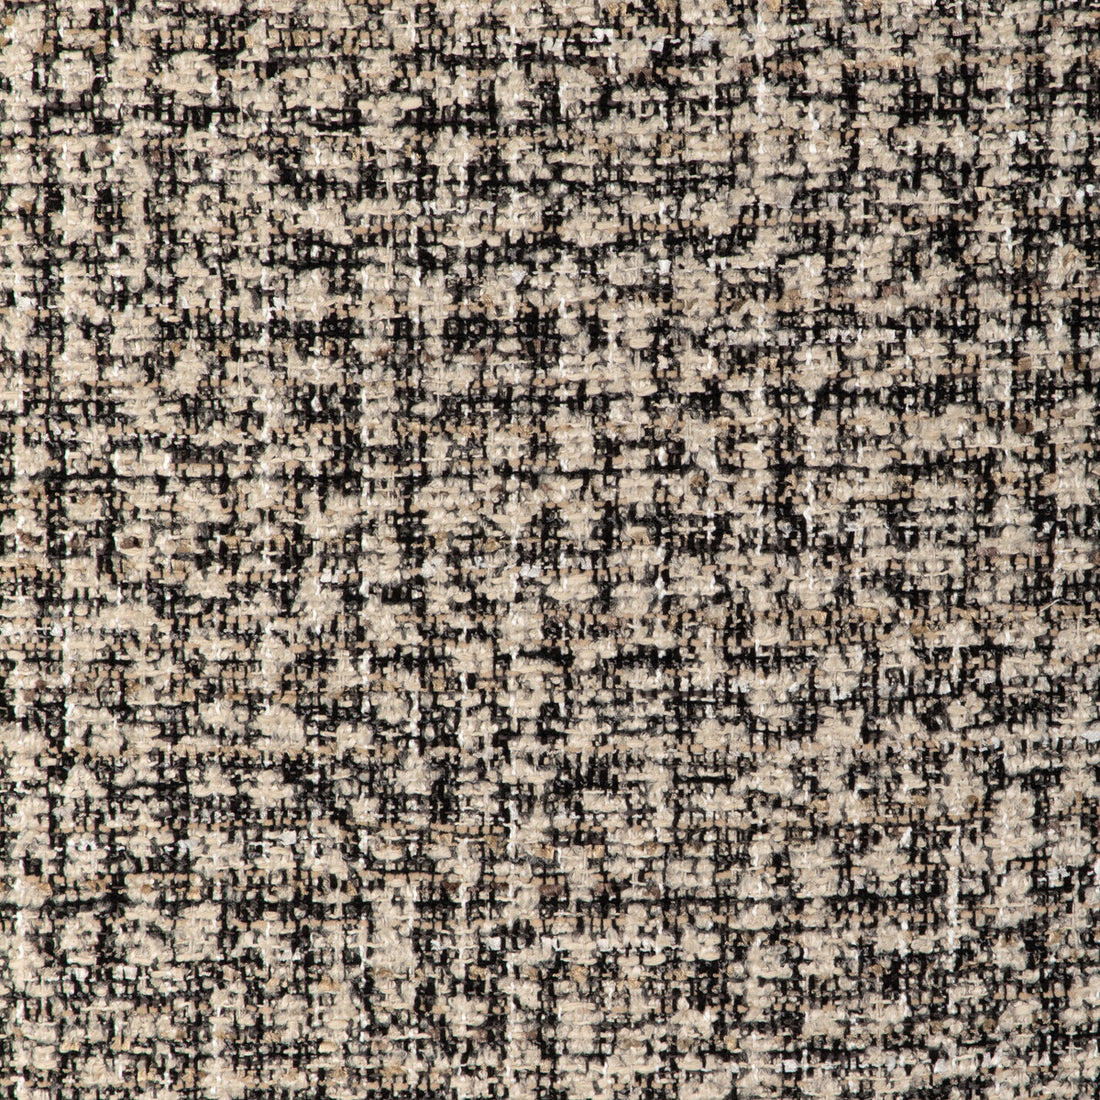 Kravet Design fabric in 37119-816 color - pattern 37119.816.0 - by Kravet Design in the Woven Colors collection